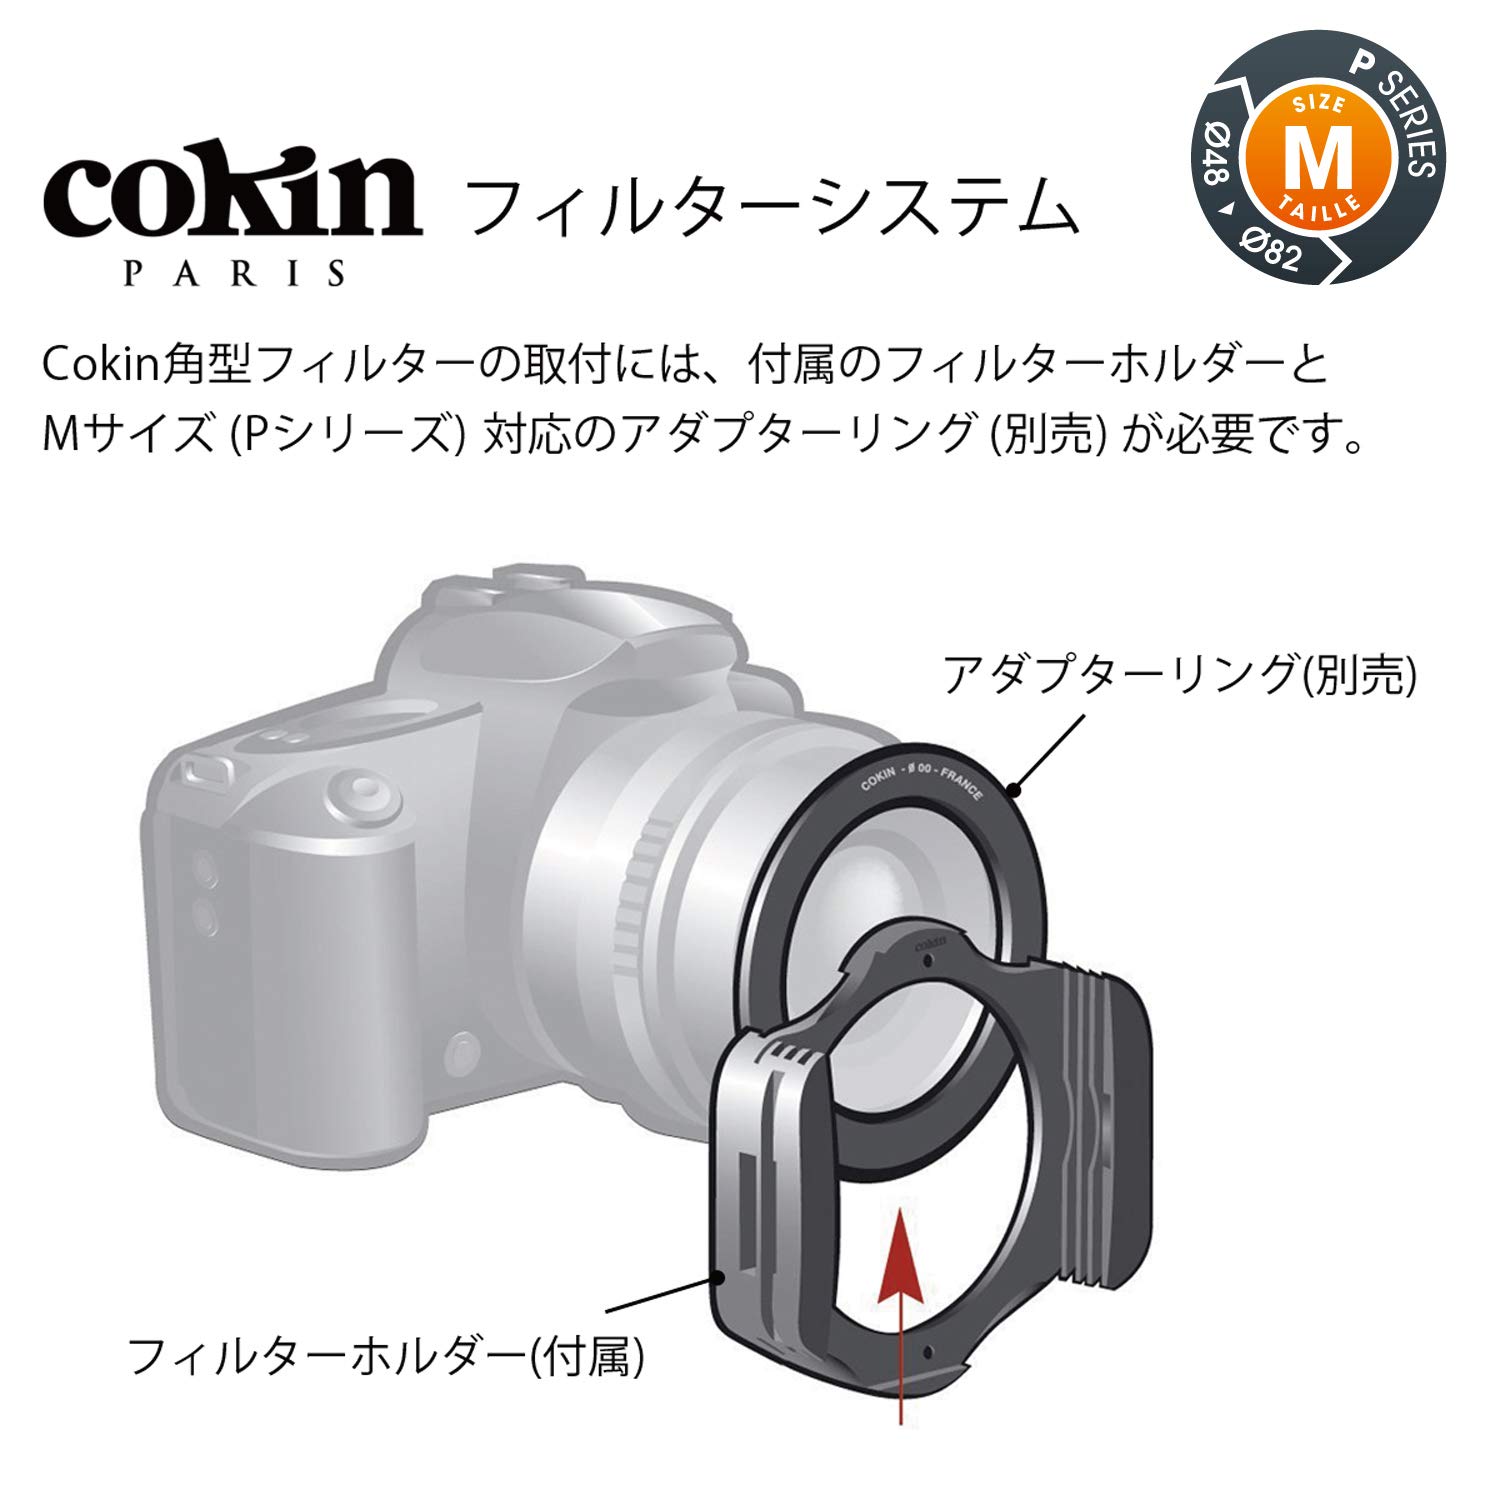 Cokin Square Filter Gradual ND Creative Kit Plus - Includes M (P) Series Filter Holder, Gnd 1-Stop (121L), Gnd 2-Stop (121M), Gnd 3-Stop Soft (121S)